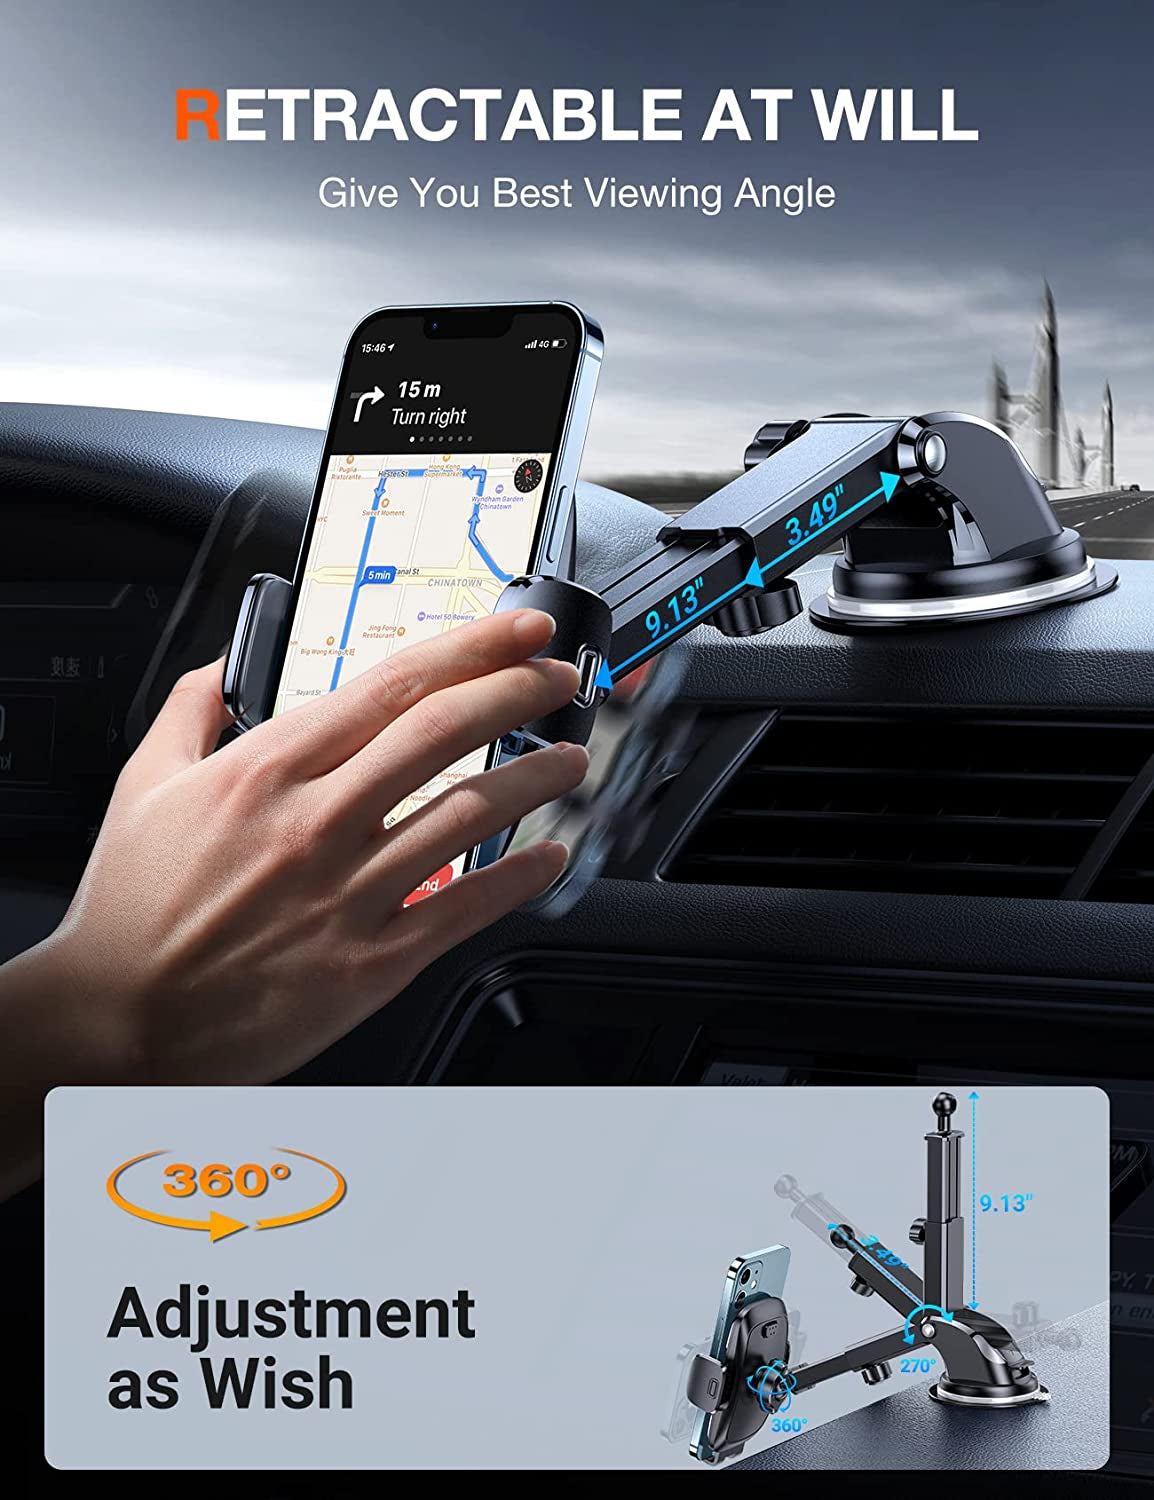 Universal Silicone Phone Mount for Car - Anti-Slip, Anti-Scratch, Thick Case Friendly - Compatible with Iphone 14 13 12 Pro Max, Samsung Galaxy S22 - Dashboard, Air Vent, Windshield Cell Phone Holder Mount